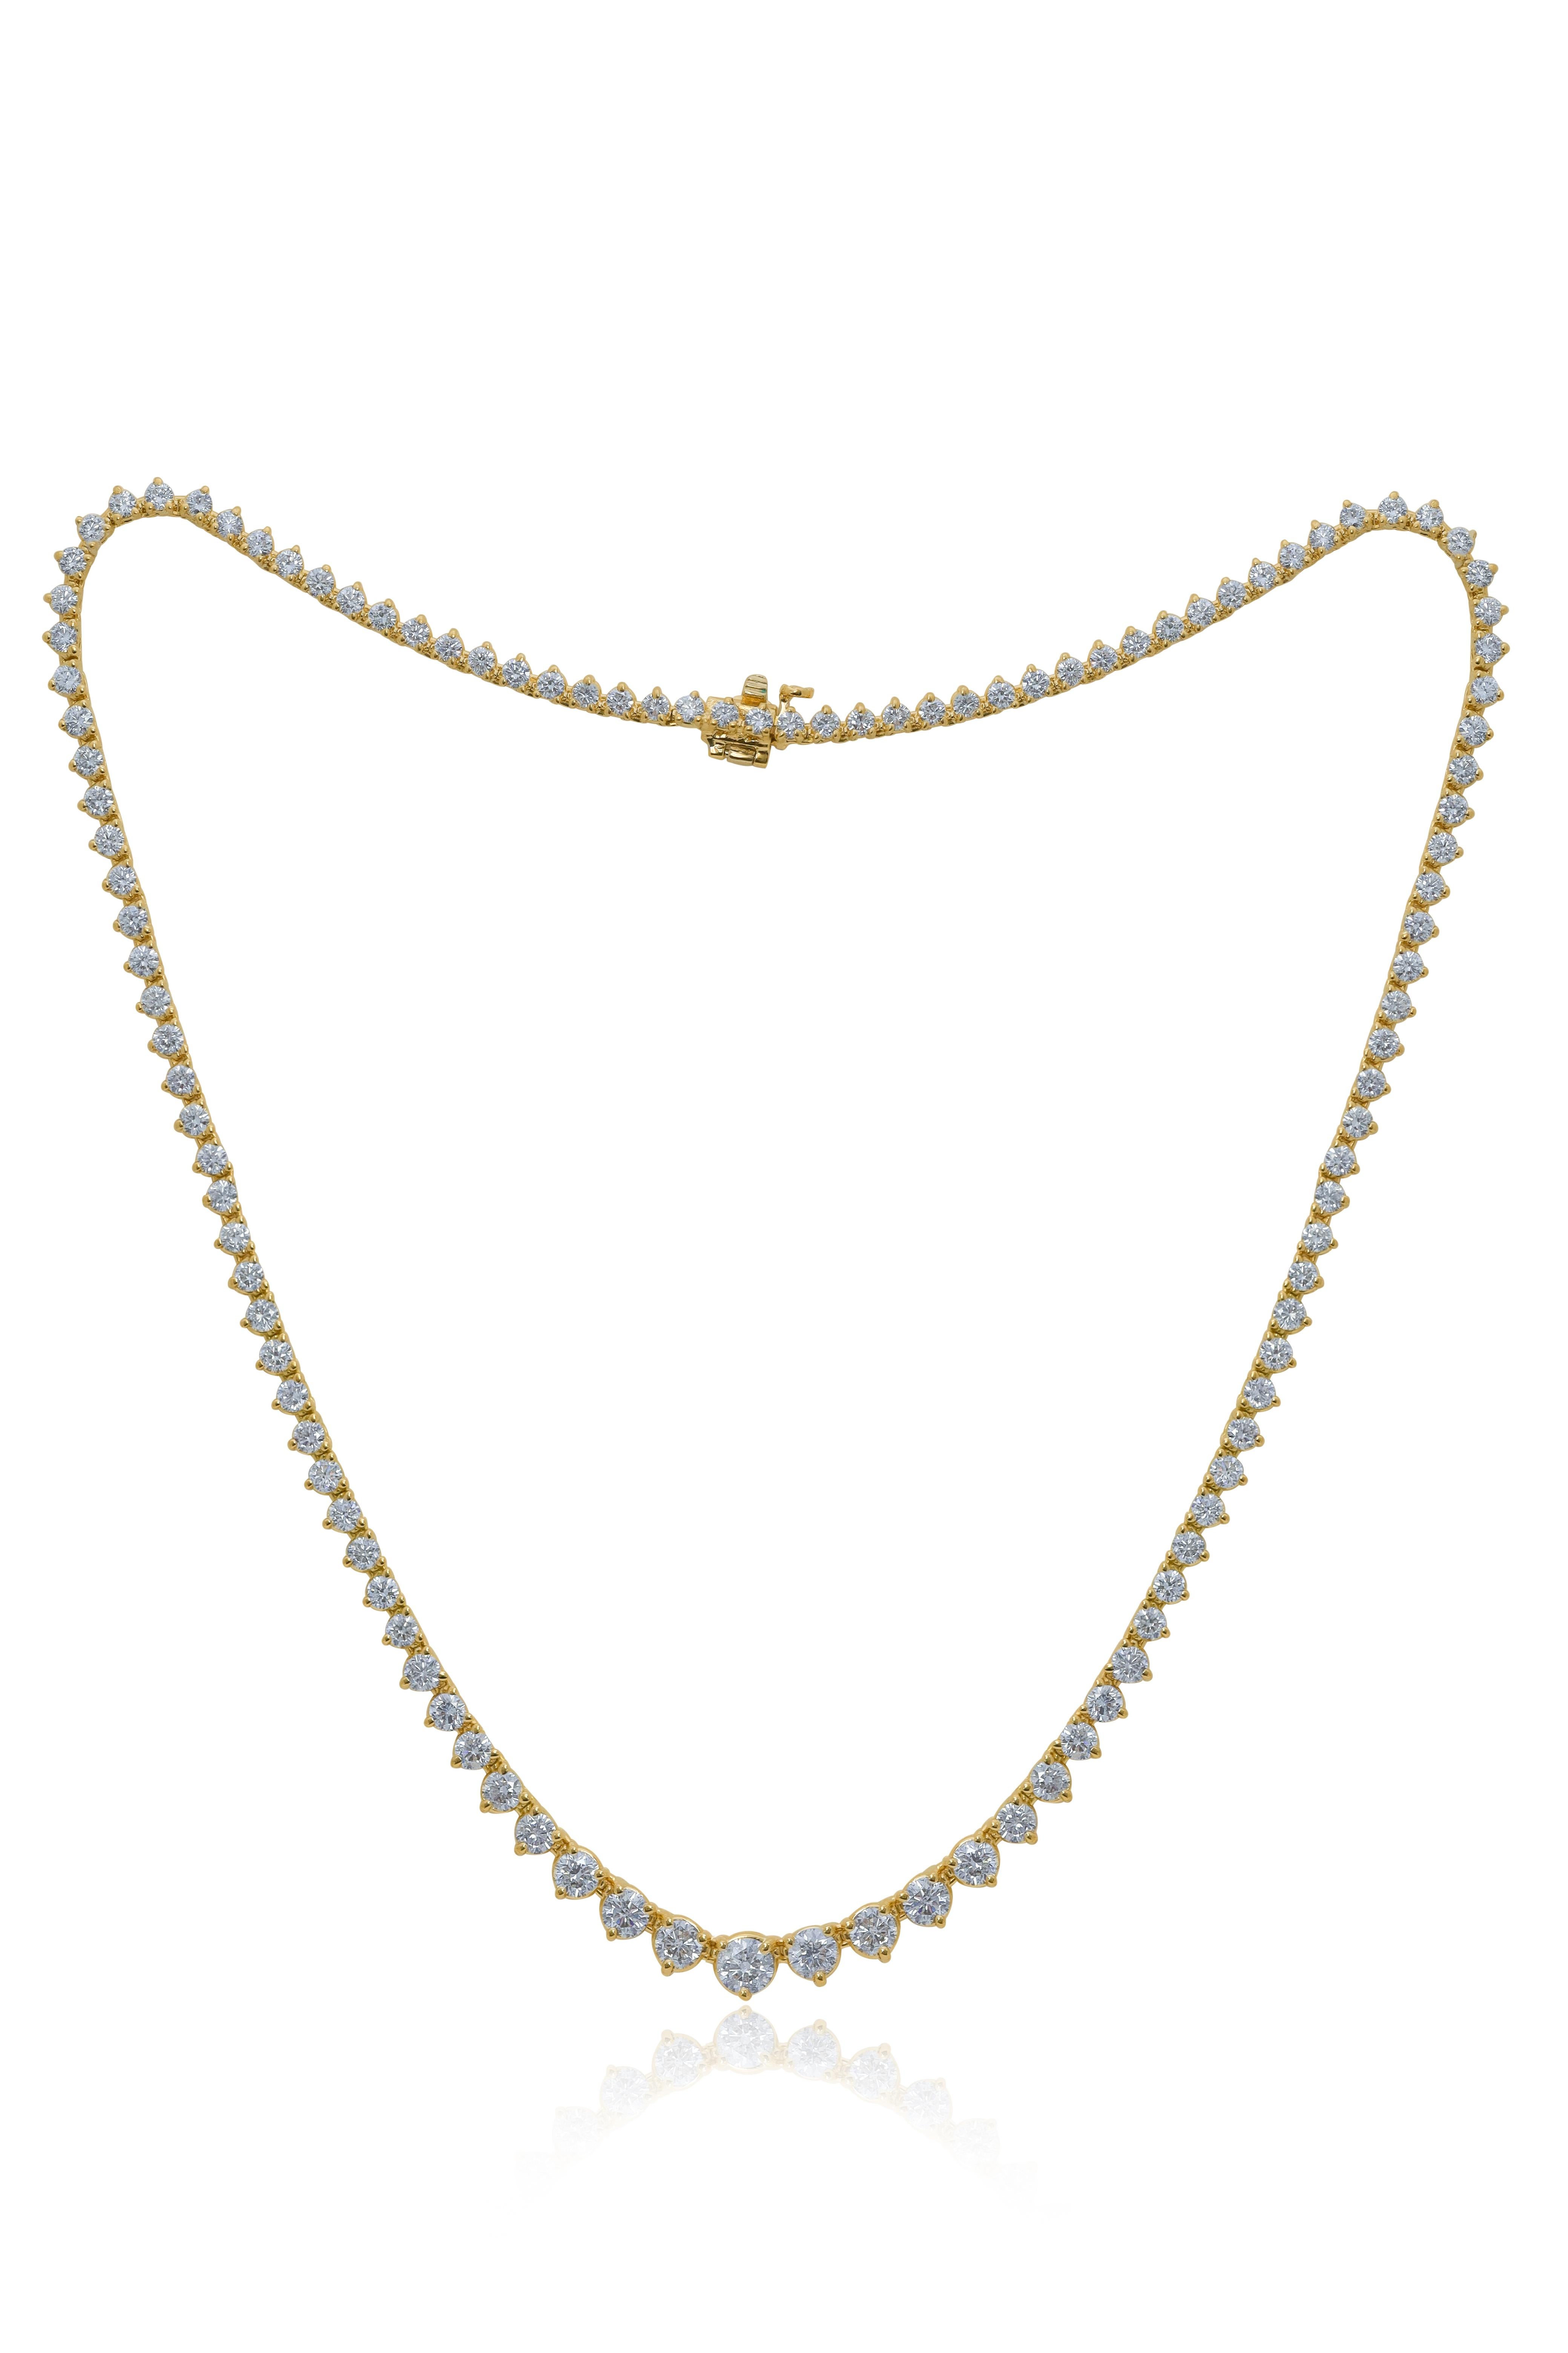 Modern Diana M. 18kt Yellow Gold Graduated Reviera Tennis Necklace Featuring 11.15 cts  For Sale